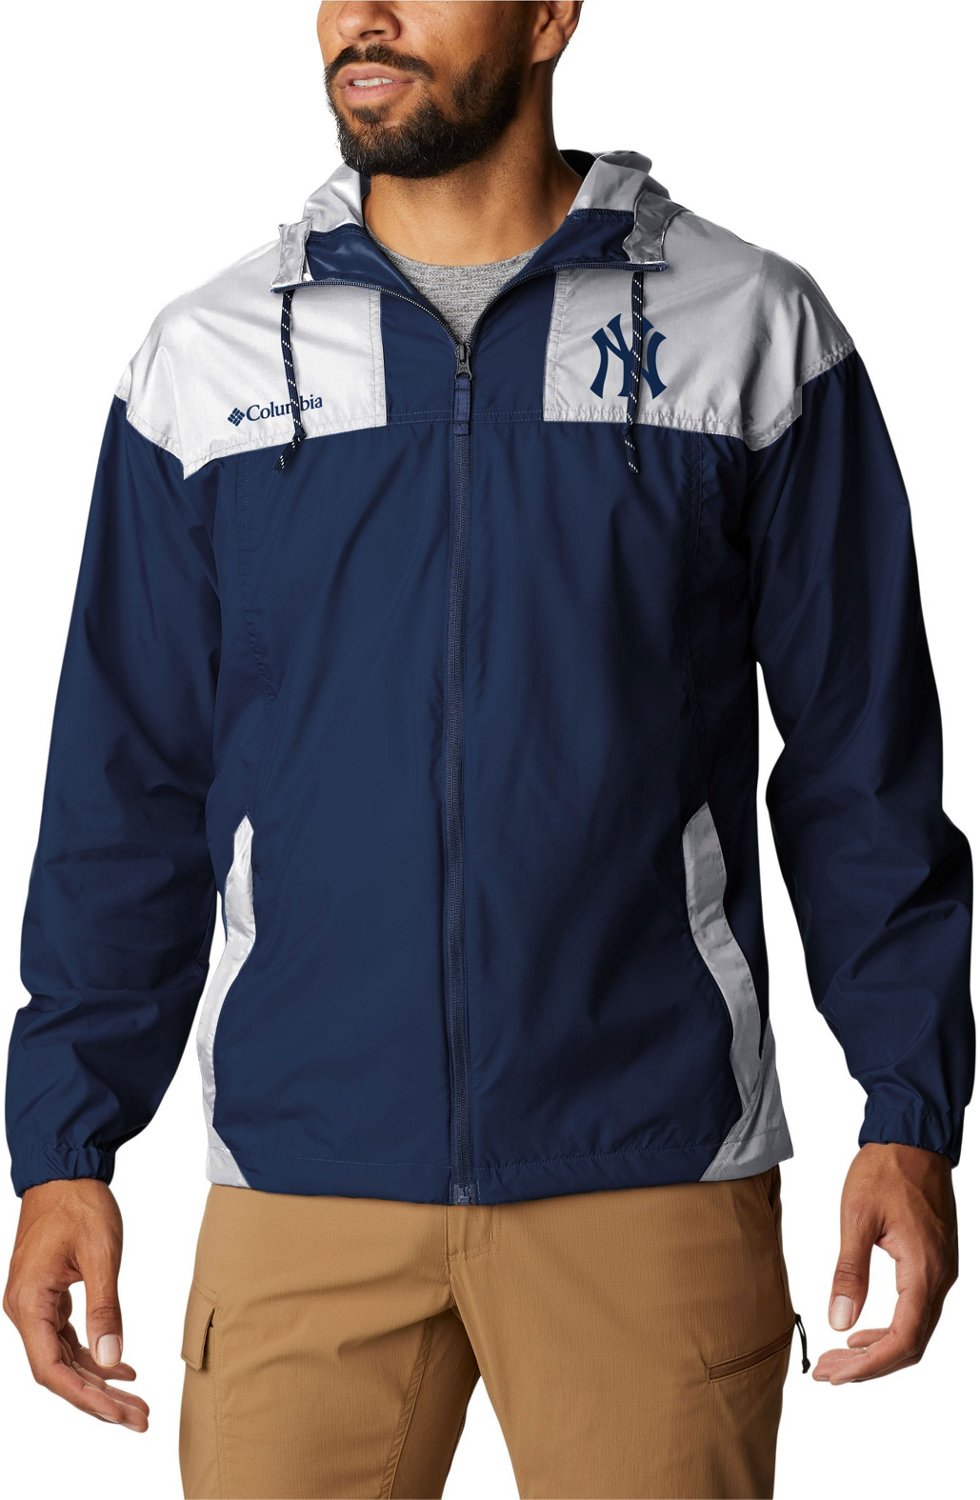 New York Yankees Collection, where to buy your Yankees gear